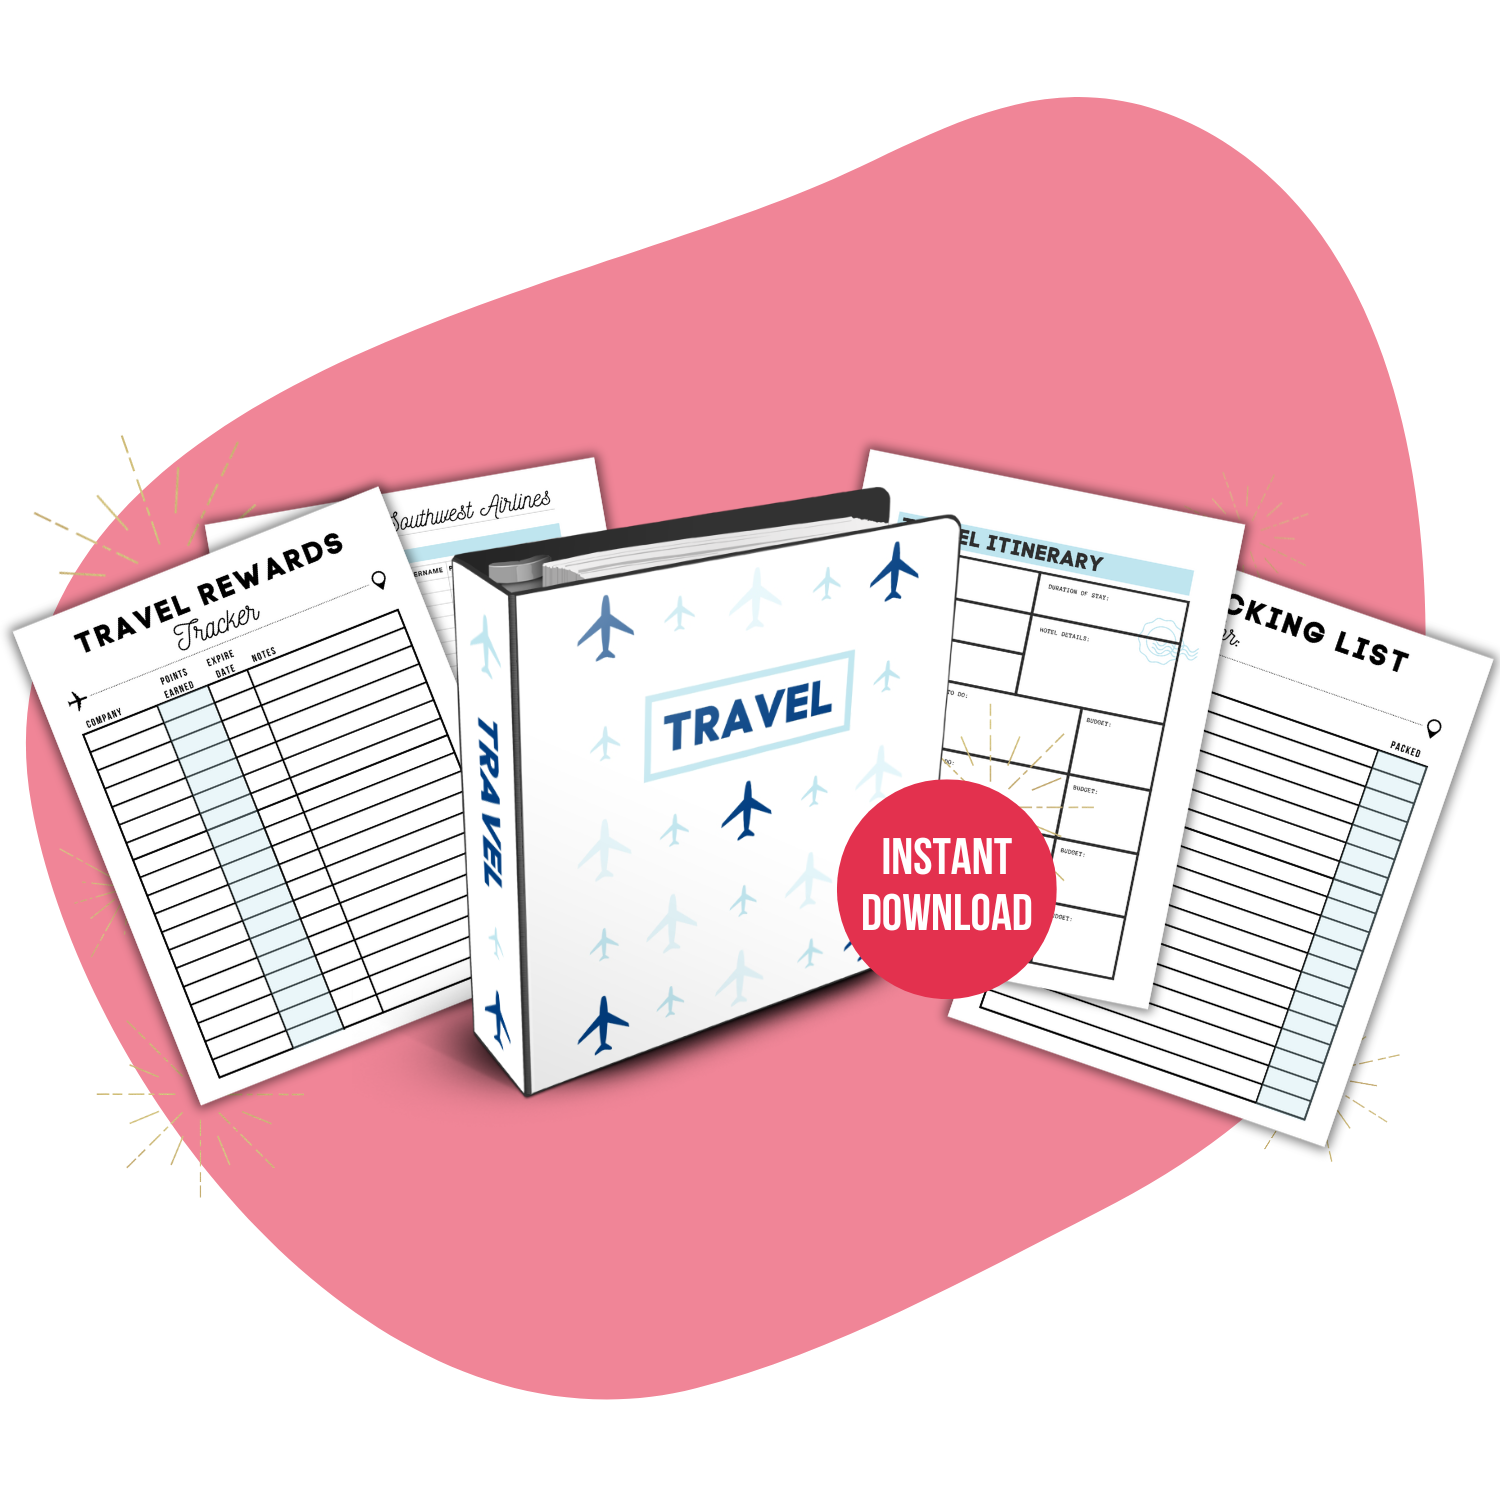 Travel Organization Printable Set Mockup. Includes Travel Rewards Tracker, Airline Miles Tracker, Travel Itinerary, Packing List. Instant Download.